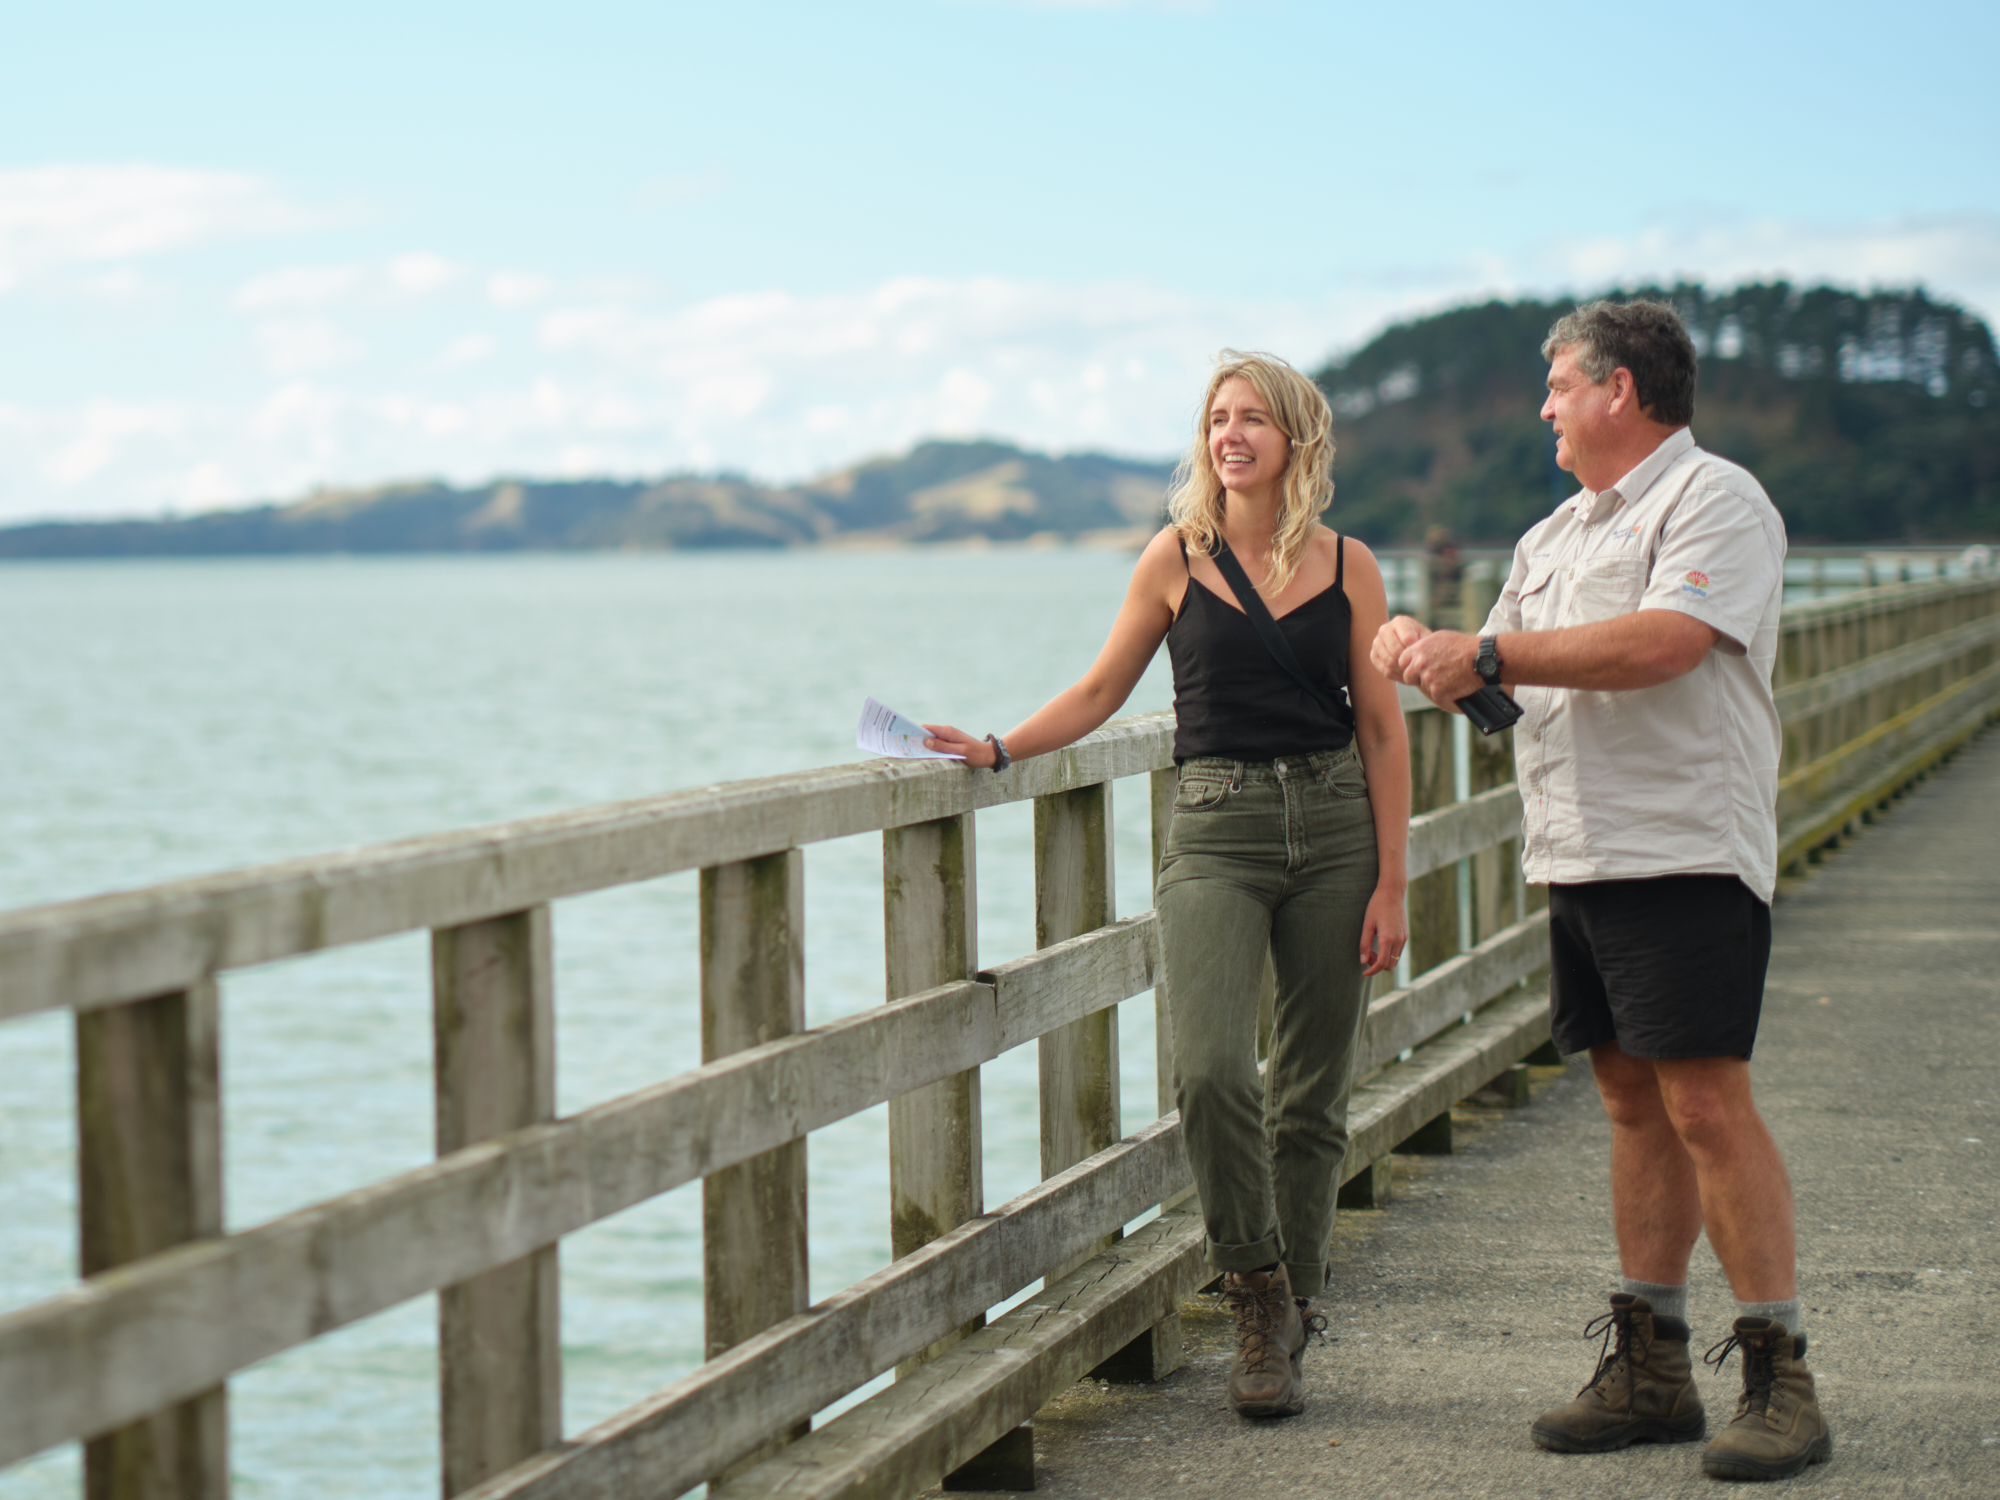 Kate and park ranger on a boardwalk next to the ocean.